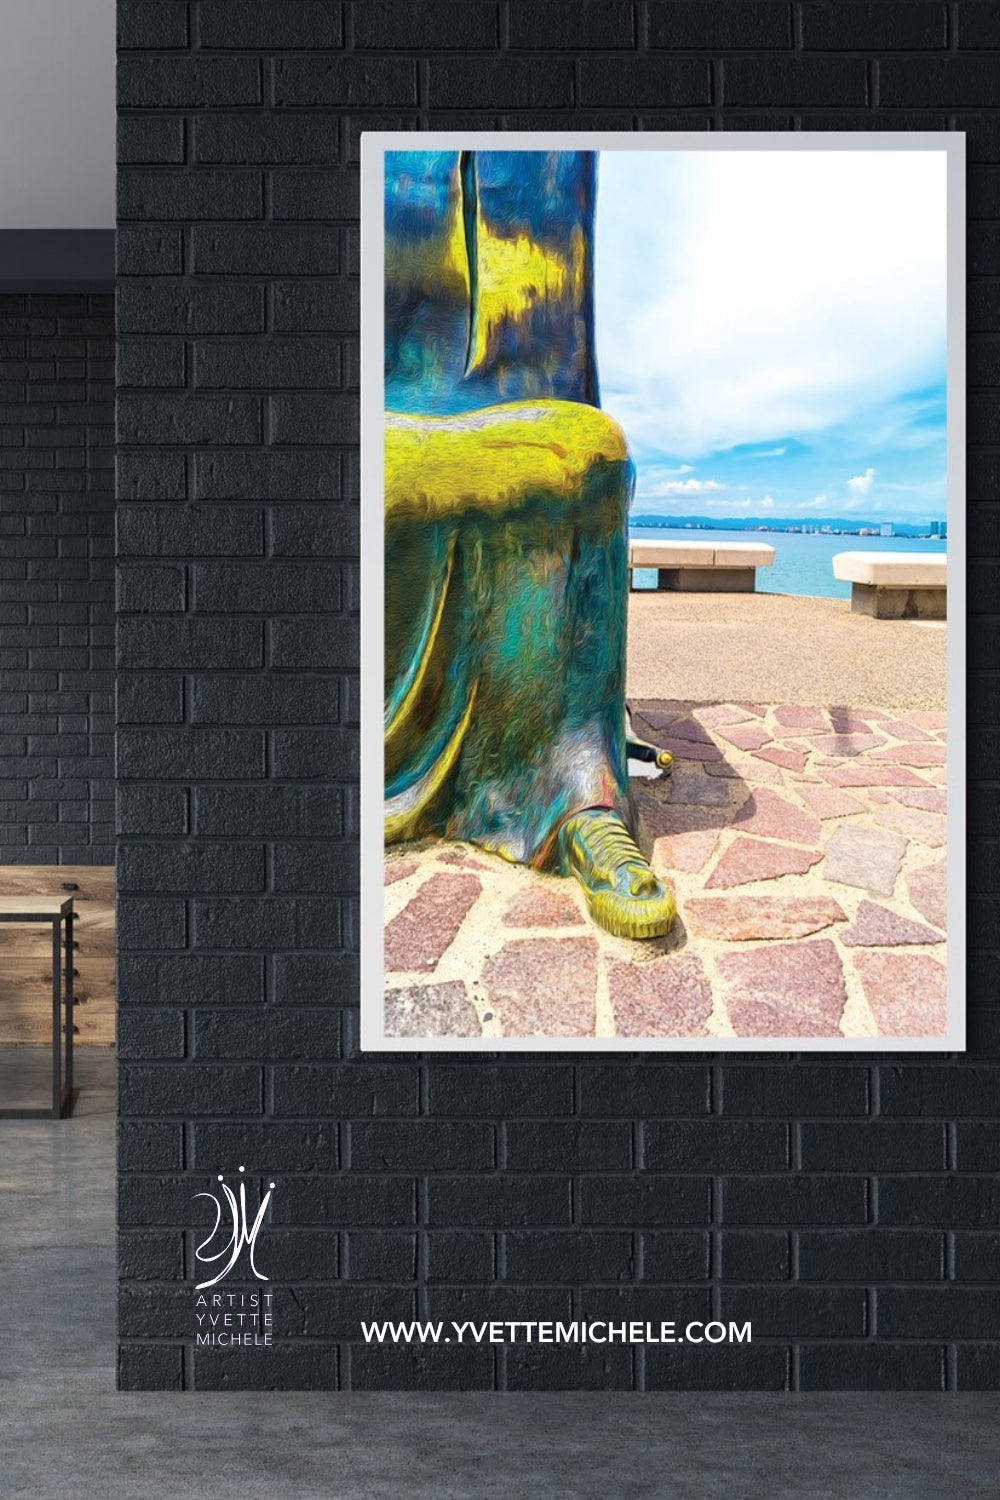 Walk On The Malecon - Sneaks - Single Edition Large Photography Print - House of Yvette Michele 